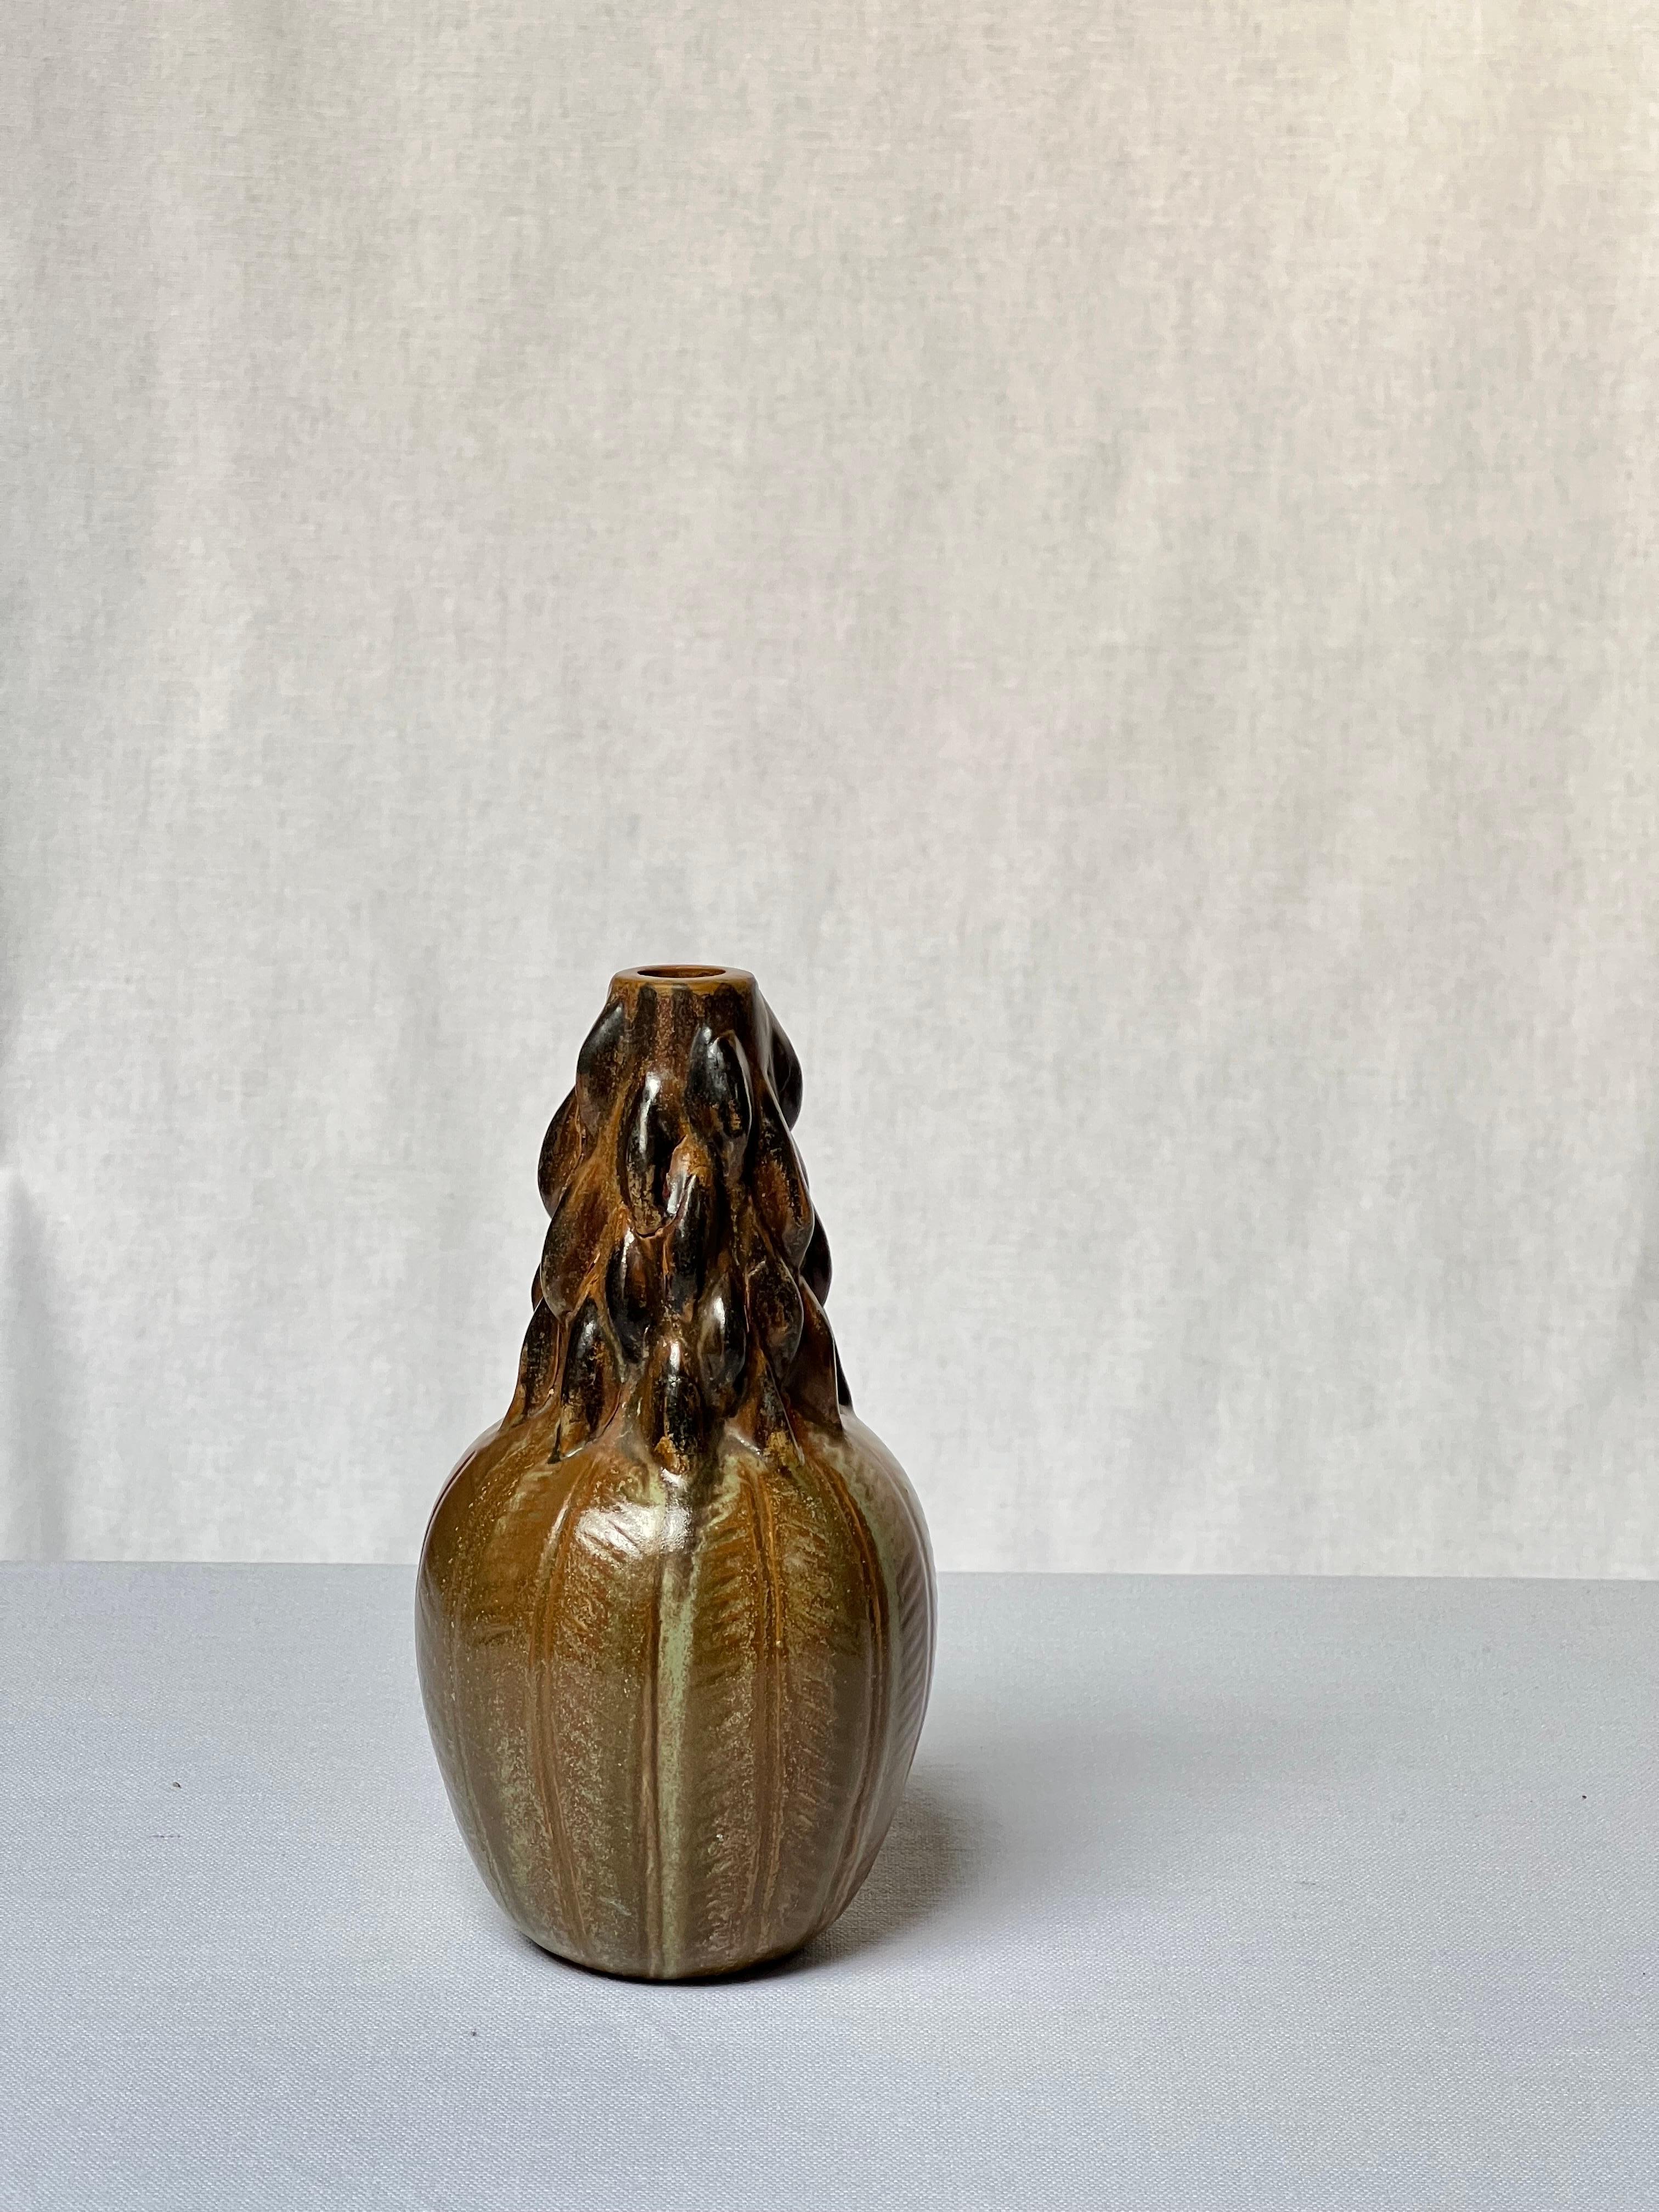 Unique vase made by or in the manner of Axel Salto. Beautiful glaze and details. There's various shades of brown and greens. Will fit any interiors, a true beauty.




Axel Johannes Salto, né le 17 novembre 1889 à Copenhague et mort le 21 mars 1961